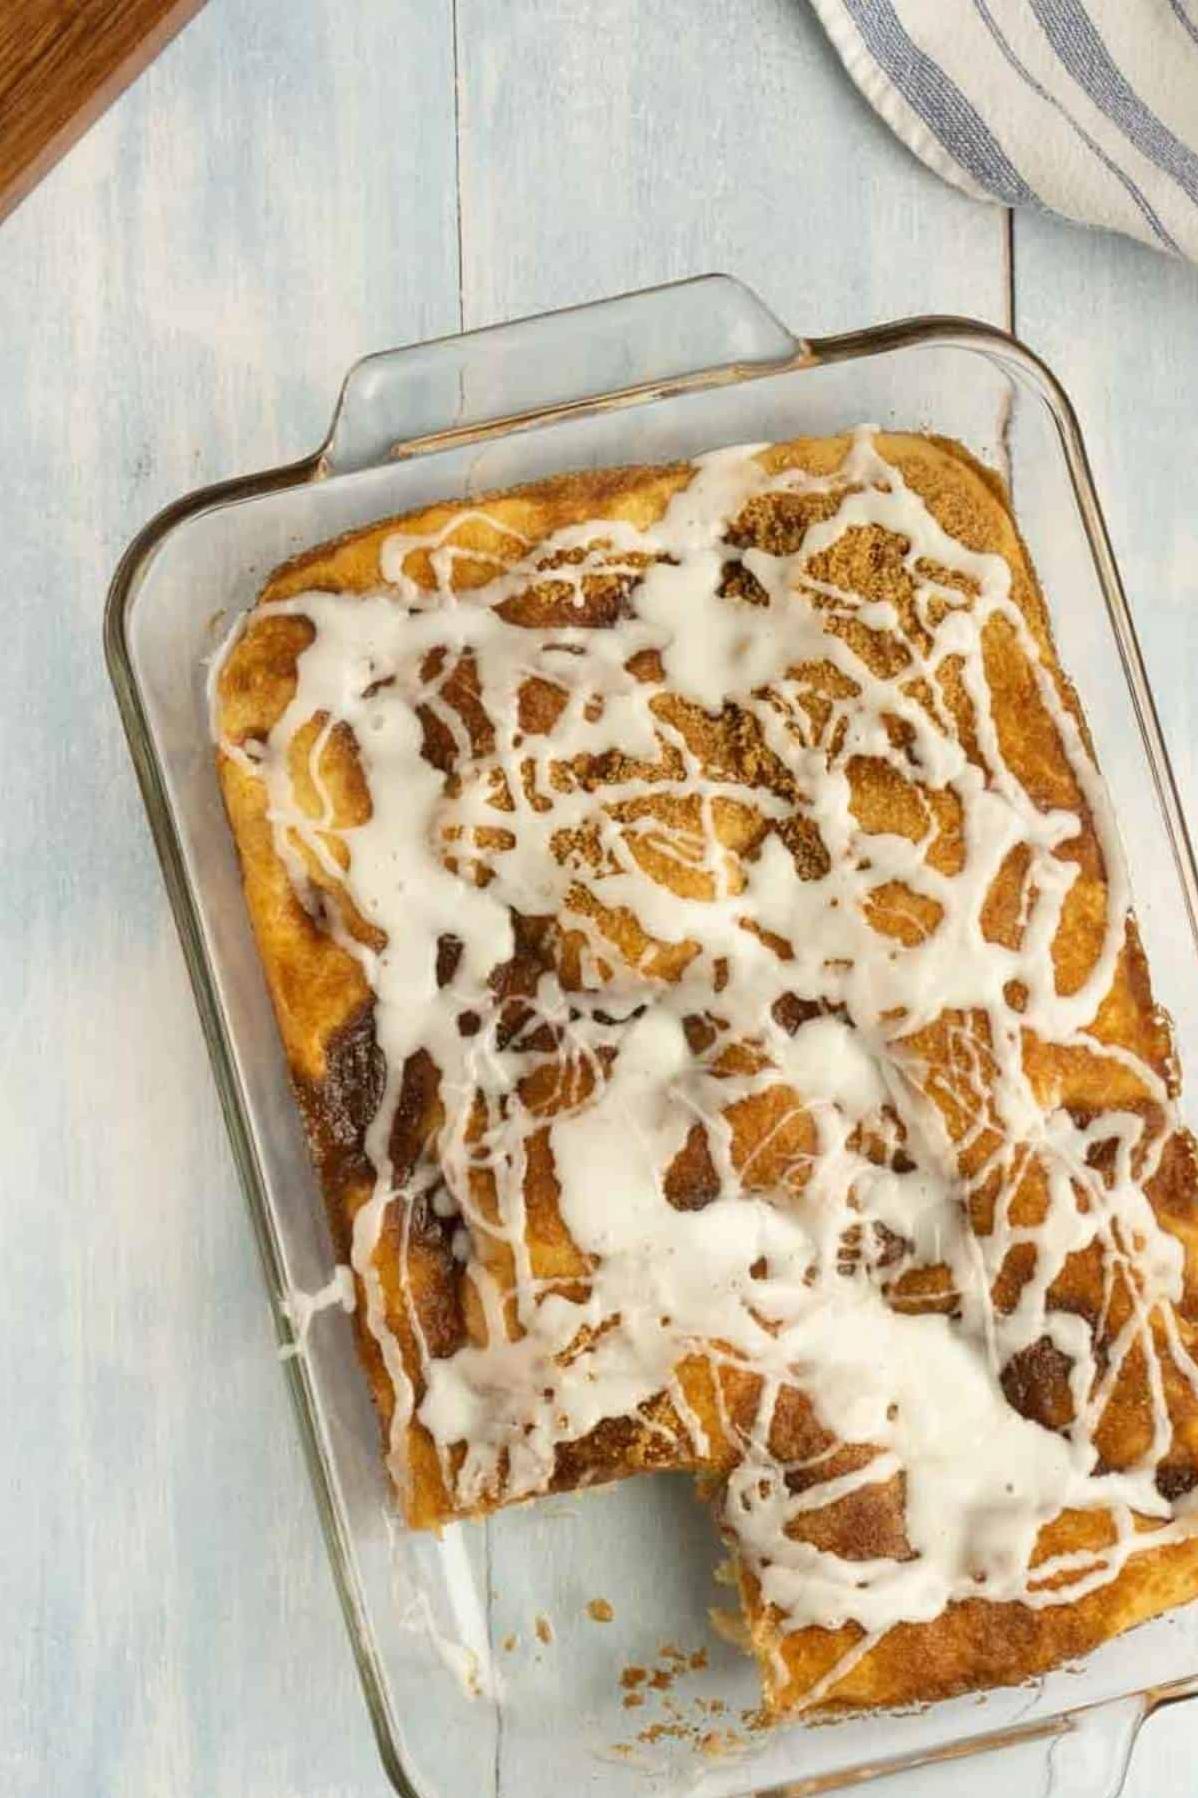  With this recipe, you can have bakery-worthy coffee cake in the comfort of your own home.